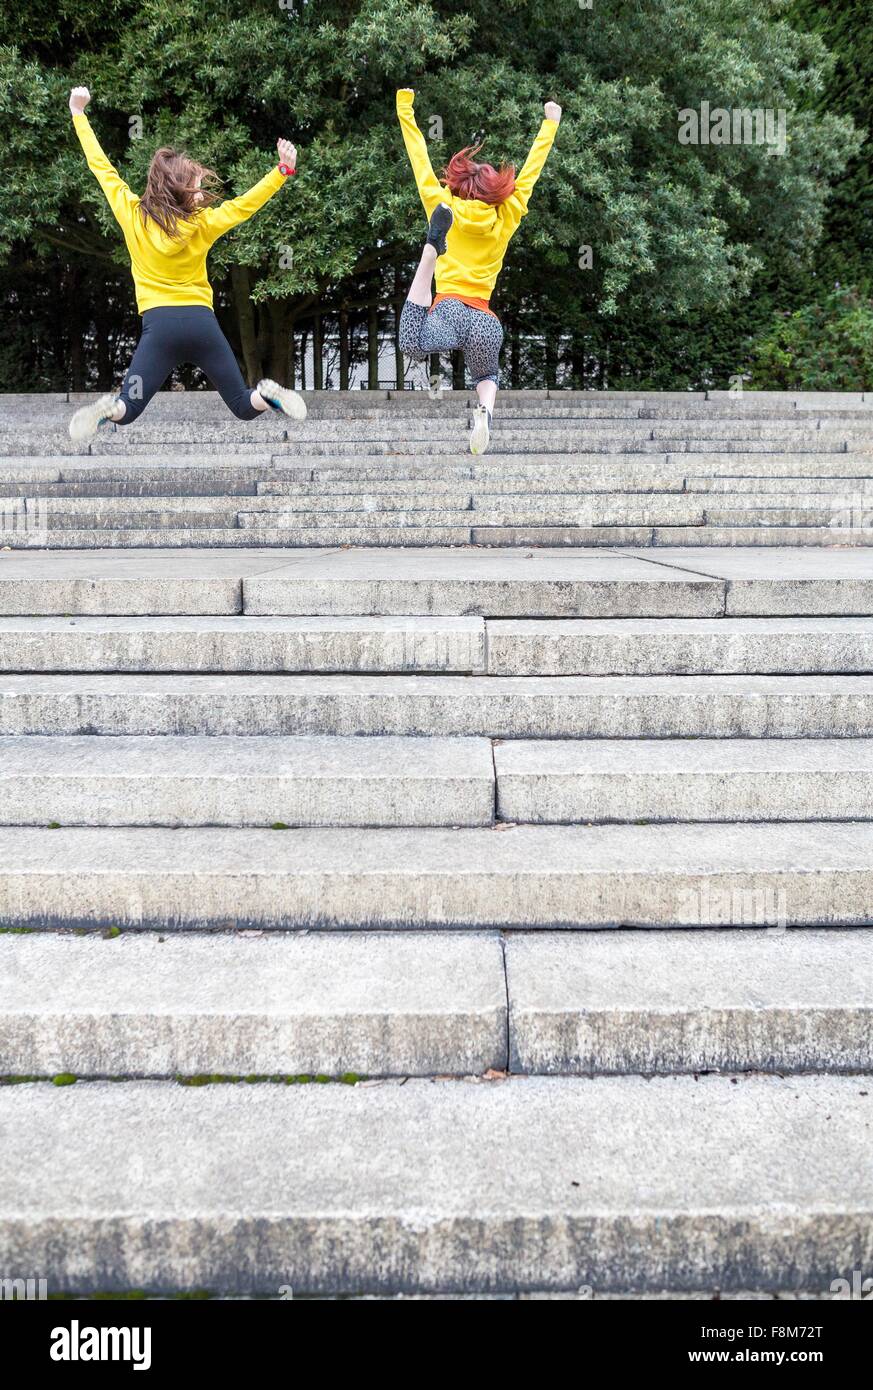 Young women jumping on steps Stock Photo